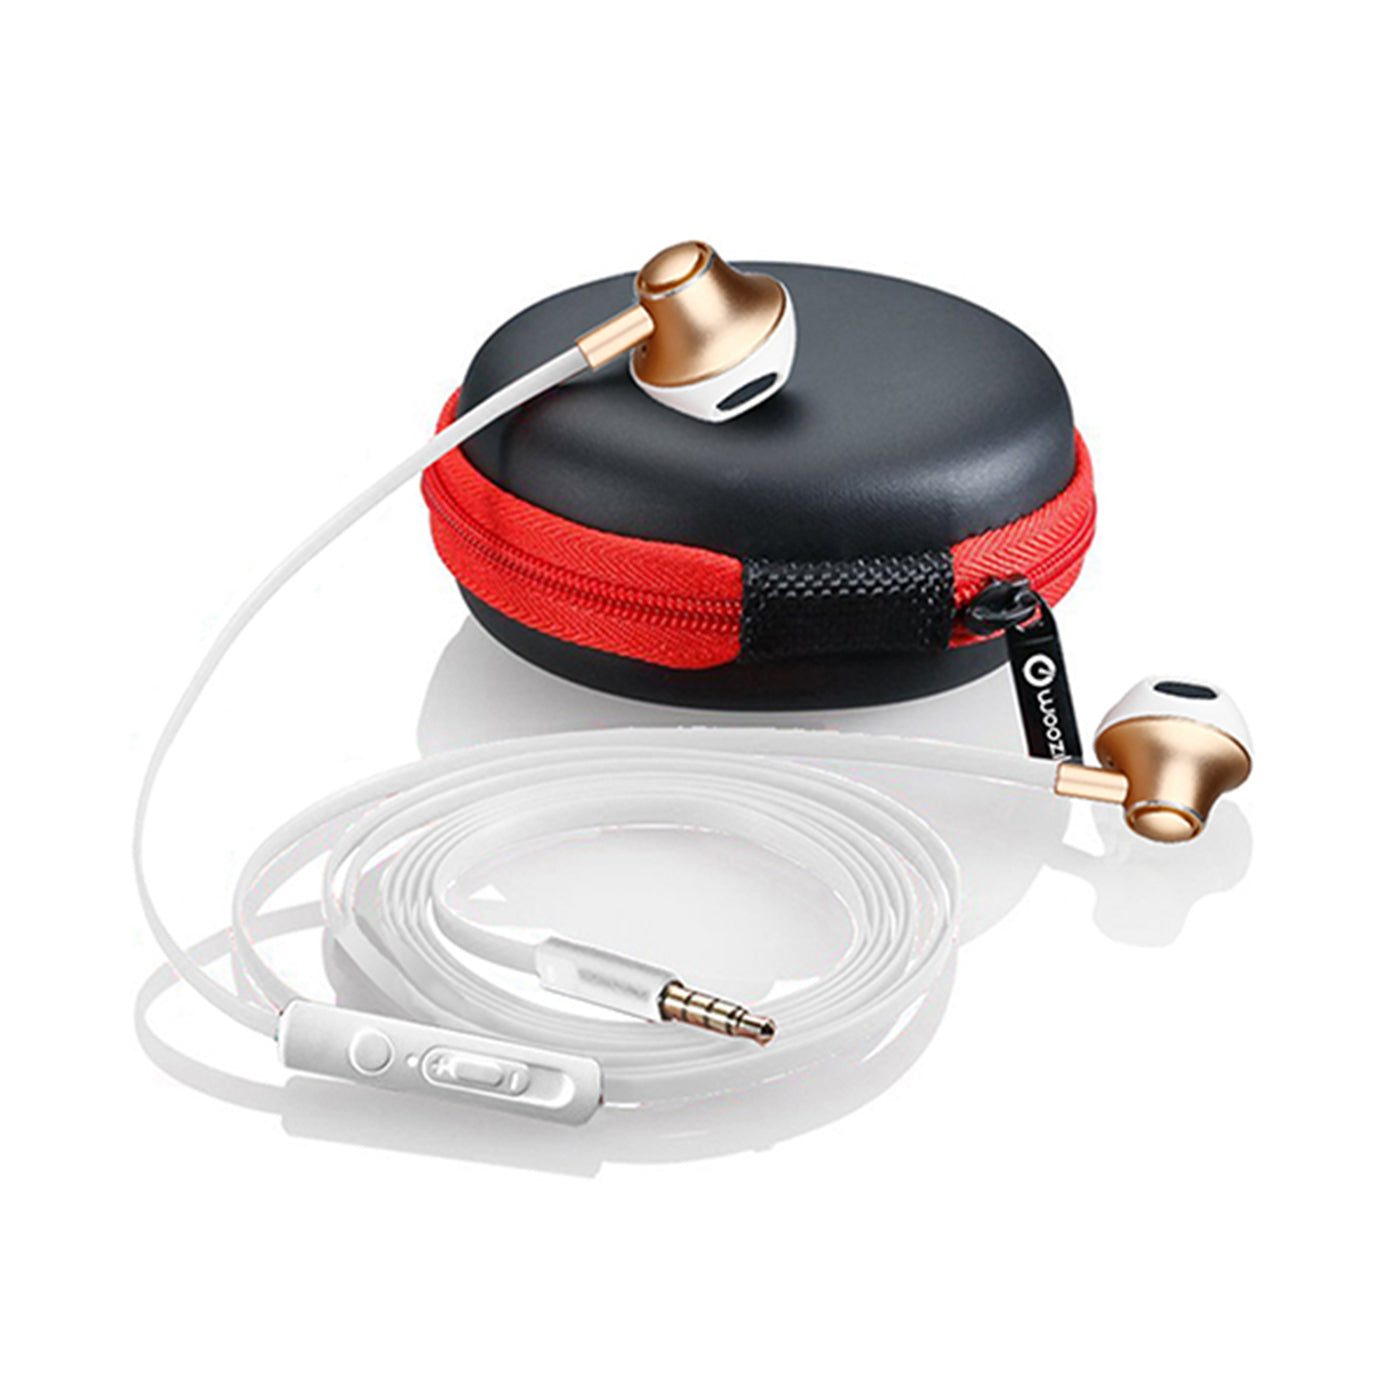 B900 Headphones Without Carrying Case In Gold